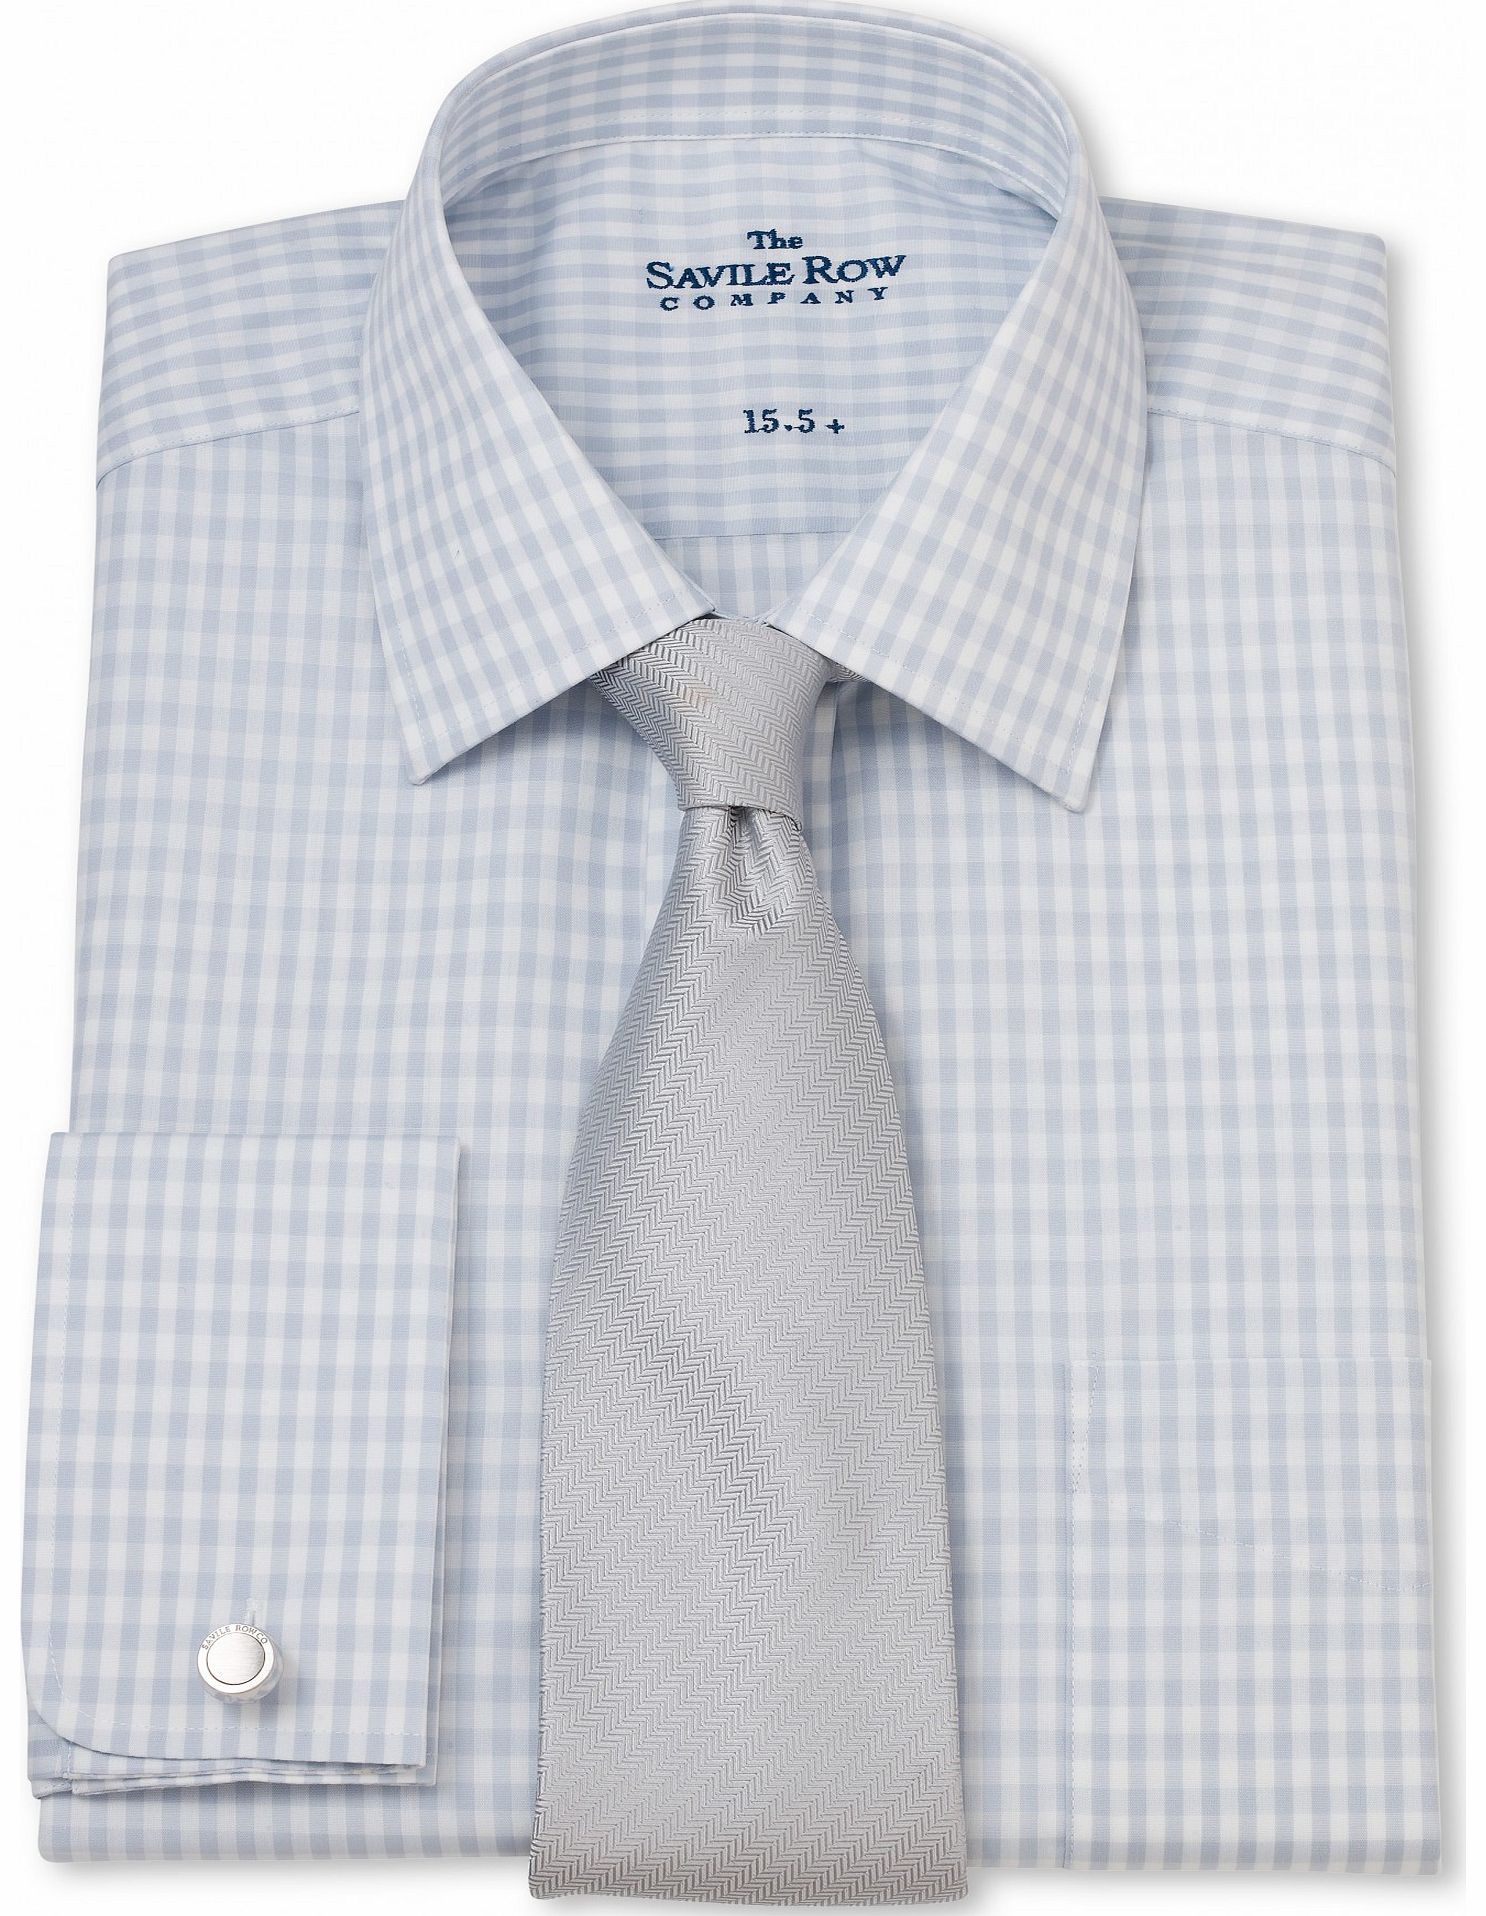 Savile Row Company Grey White Gingham Check Classic Fit Shirt 20``